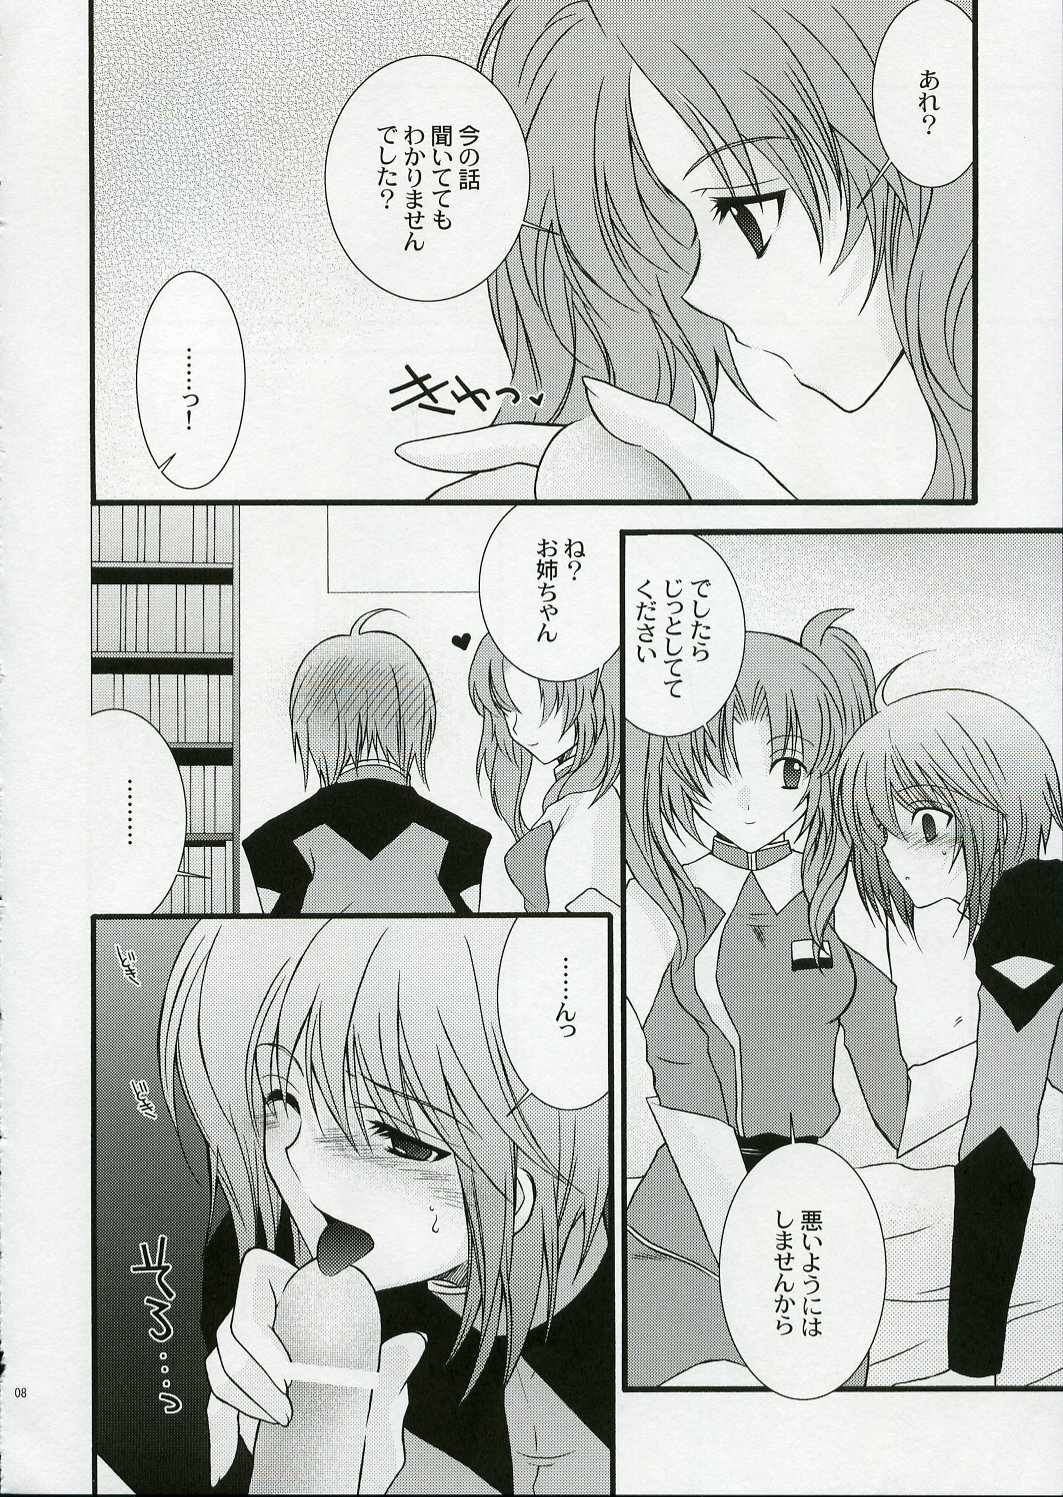 (SC28) [YLANG-YLANG (Ichie Ryouko)] RENDEZ-VOUS (Mobile Suit Gundam SEED DESTINY) page 7 full